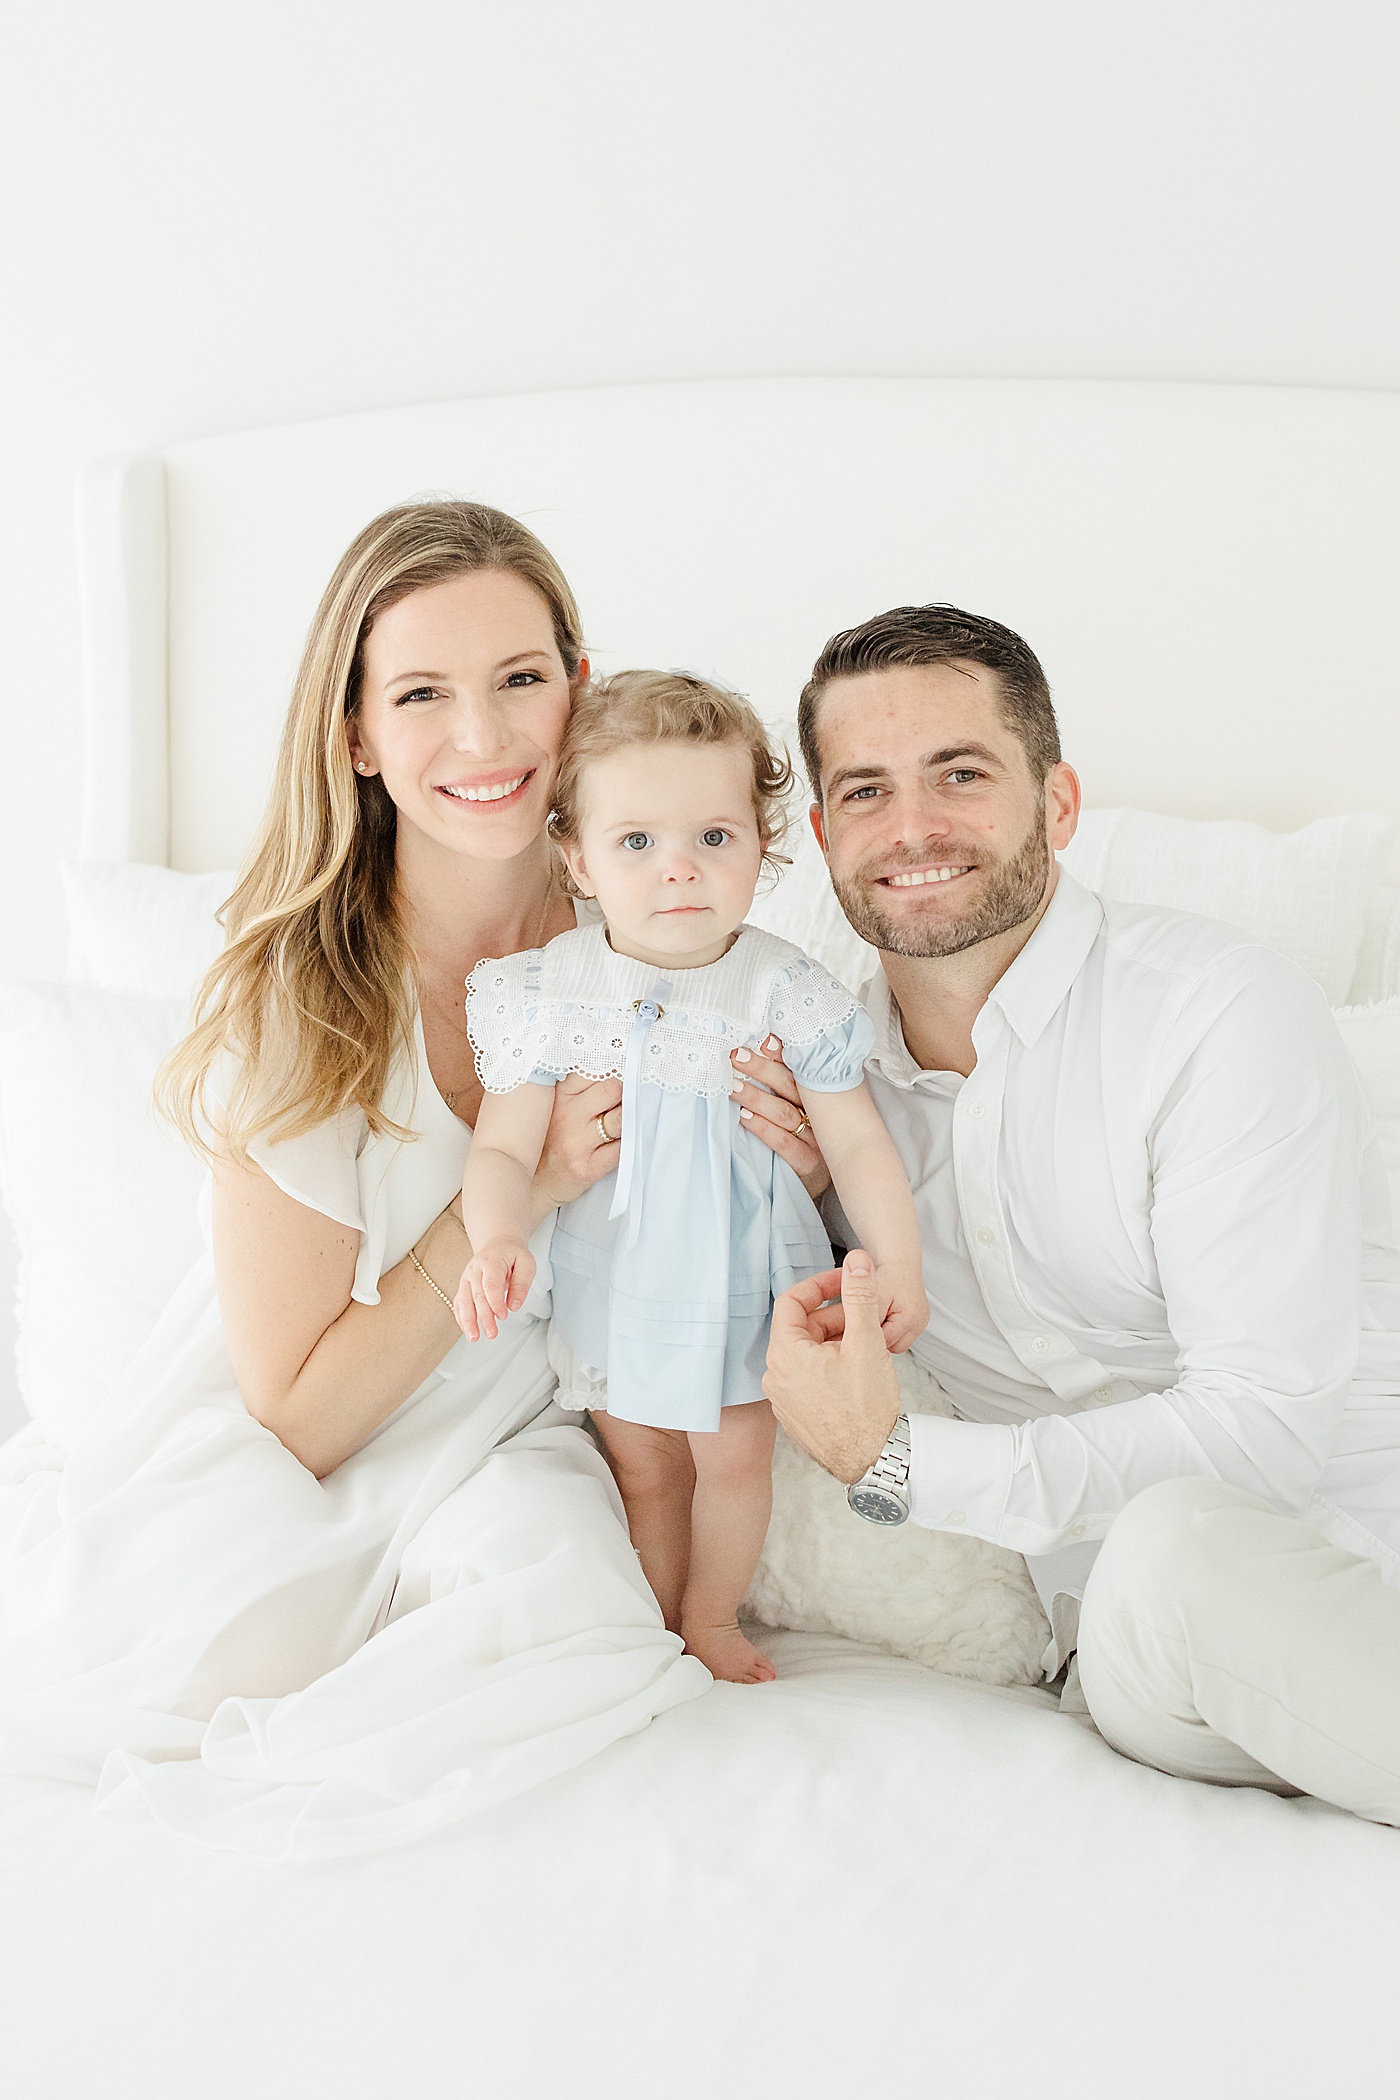 Family photos during first birthday photoshoot in studio in Westport, CT | Kristin Wood Photography